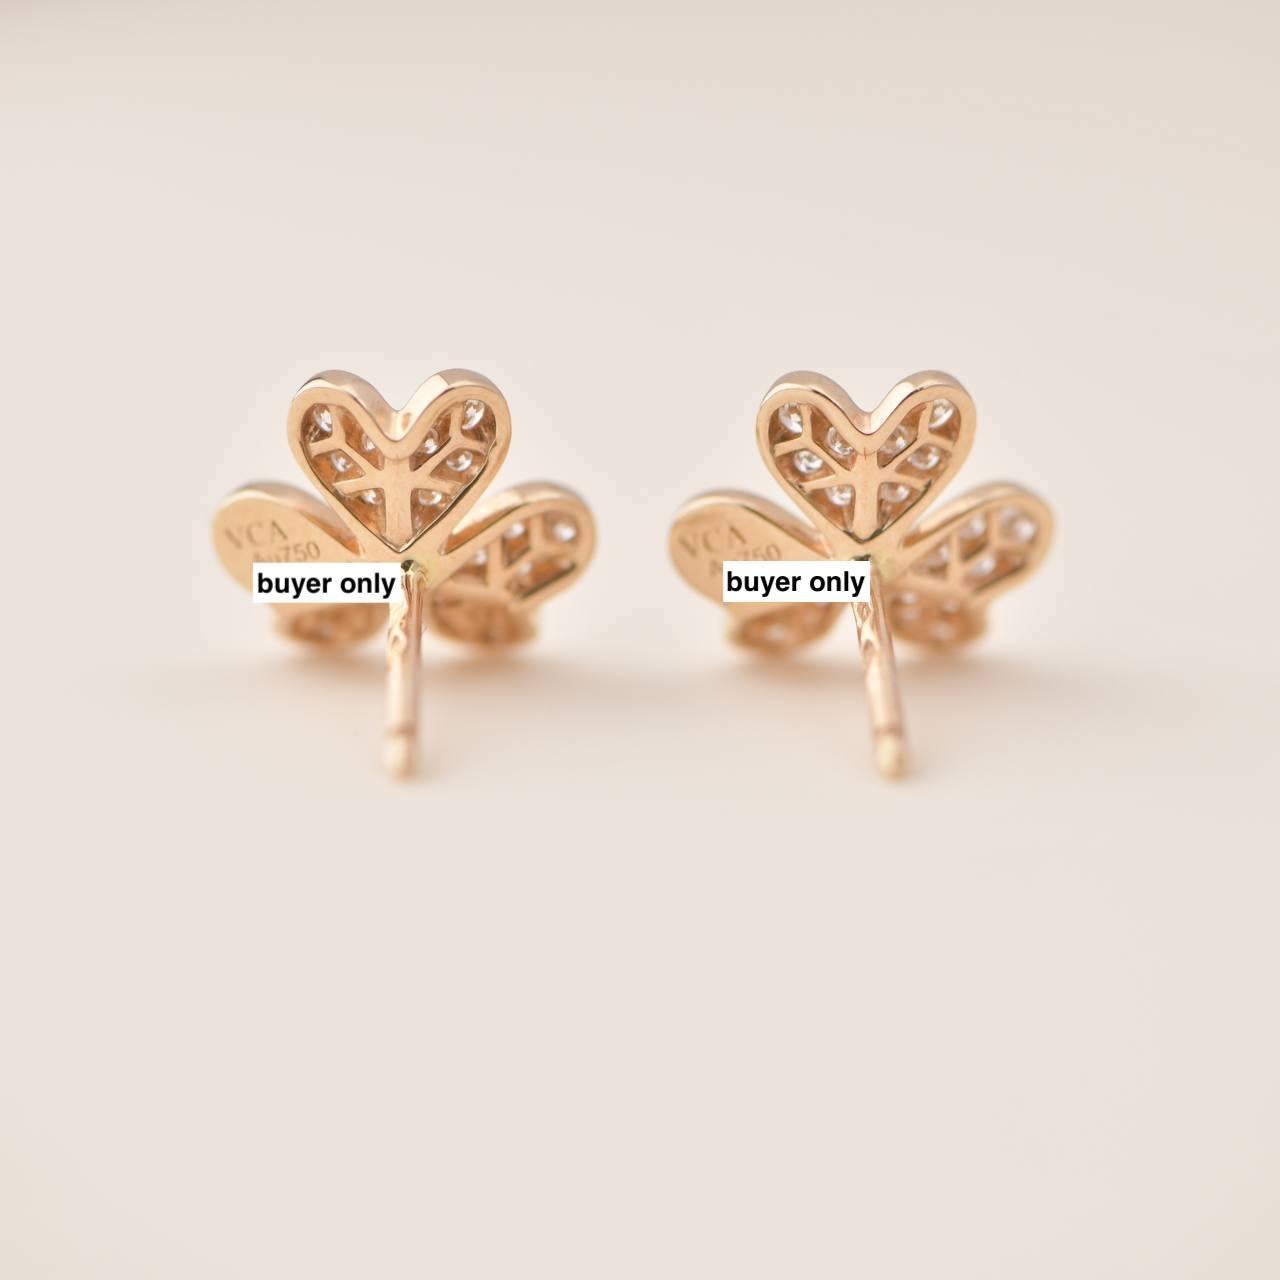 Van Cleef & Arpels Frivole Flower Rose Gold Diamond Earrings In Excellent Condition For Sale In Banbury, GB